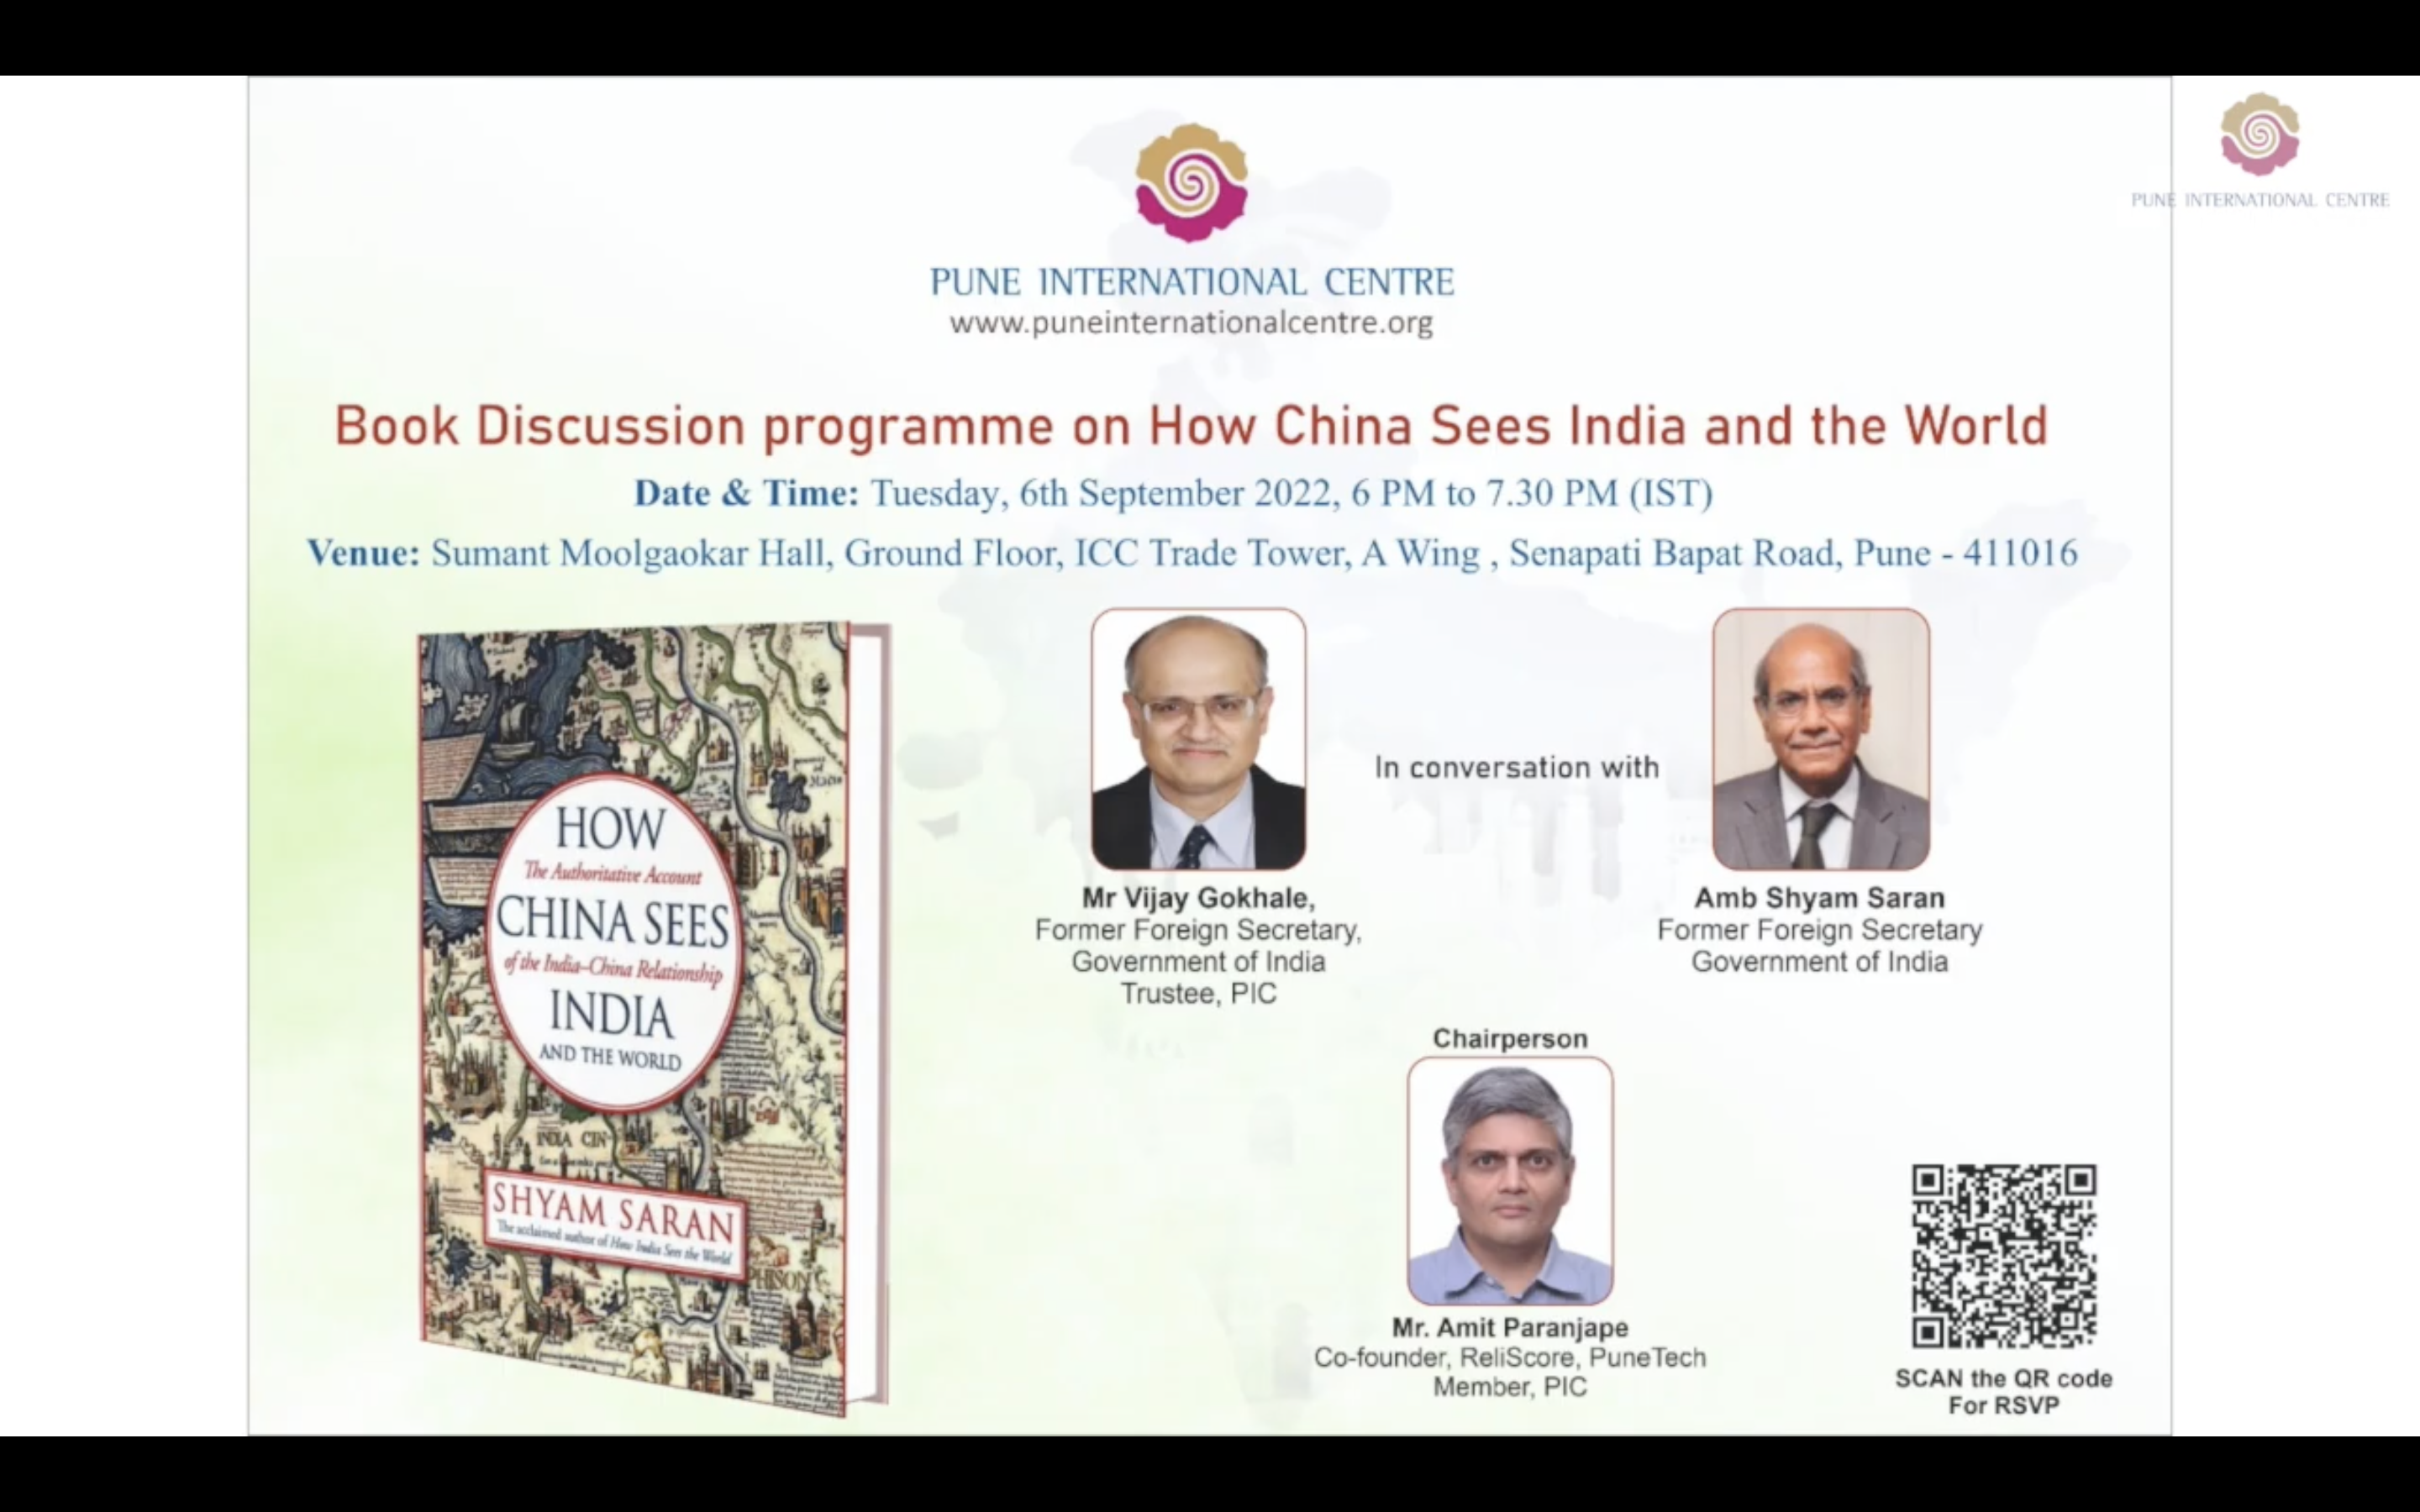 Book Discussion Programme on 'How China Sees India and the World'